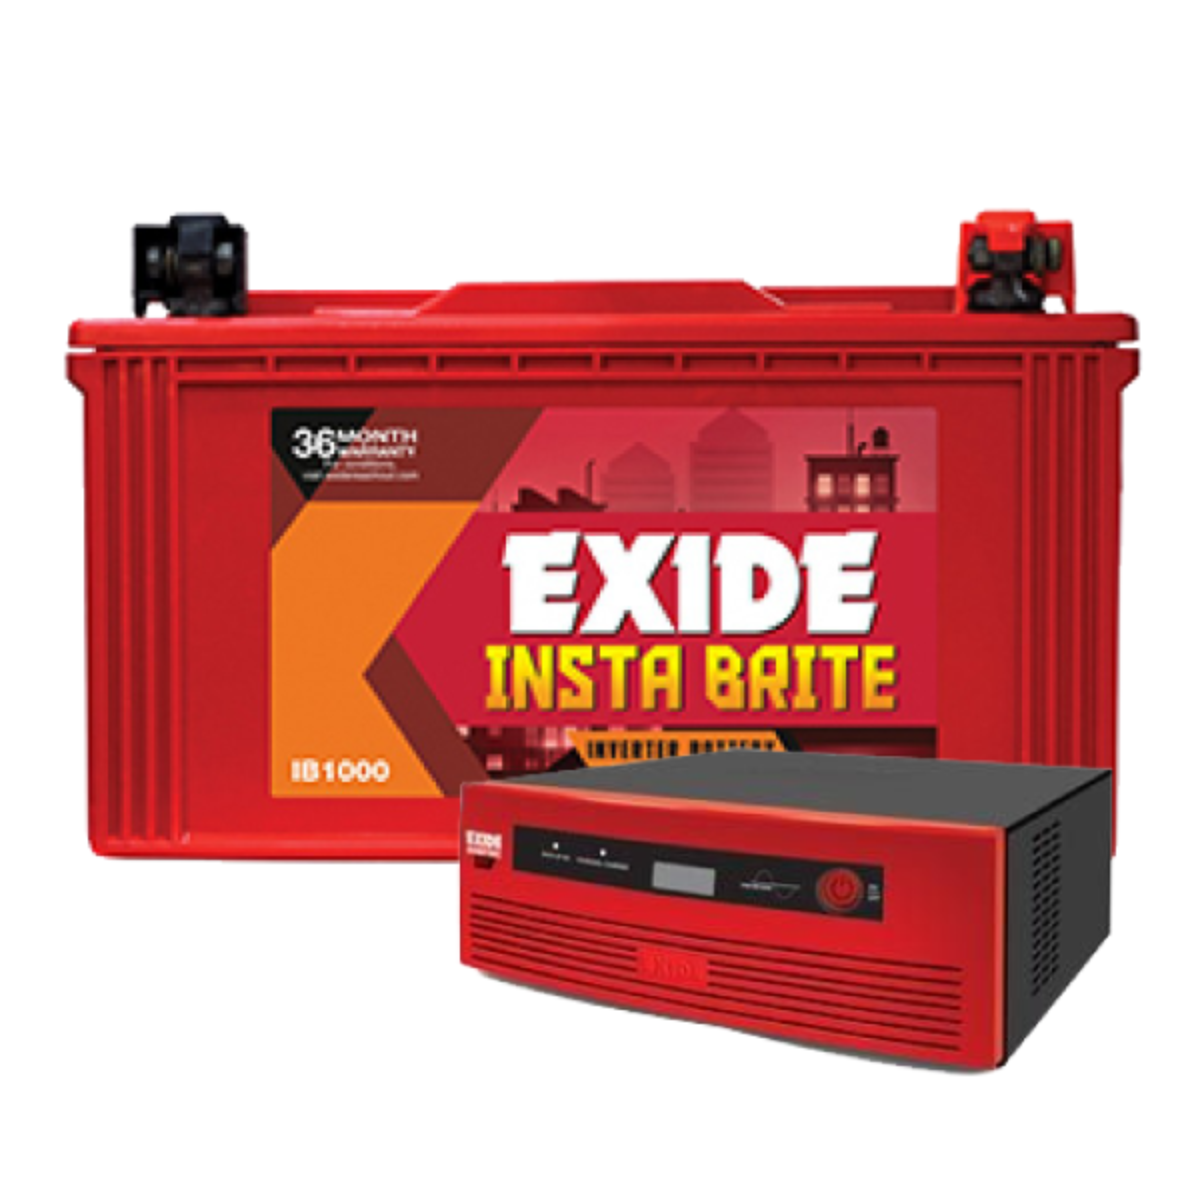 Exide GQP 850VA Sinewave Home UPS And IB 1000 100Ah Flat Plate Battery - Om  Electronics and Batteries Chennai